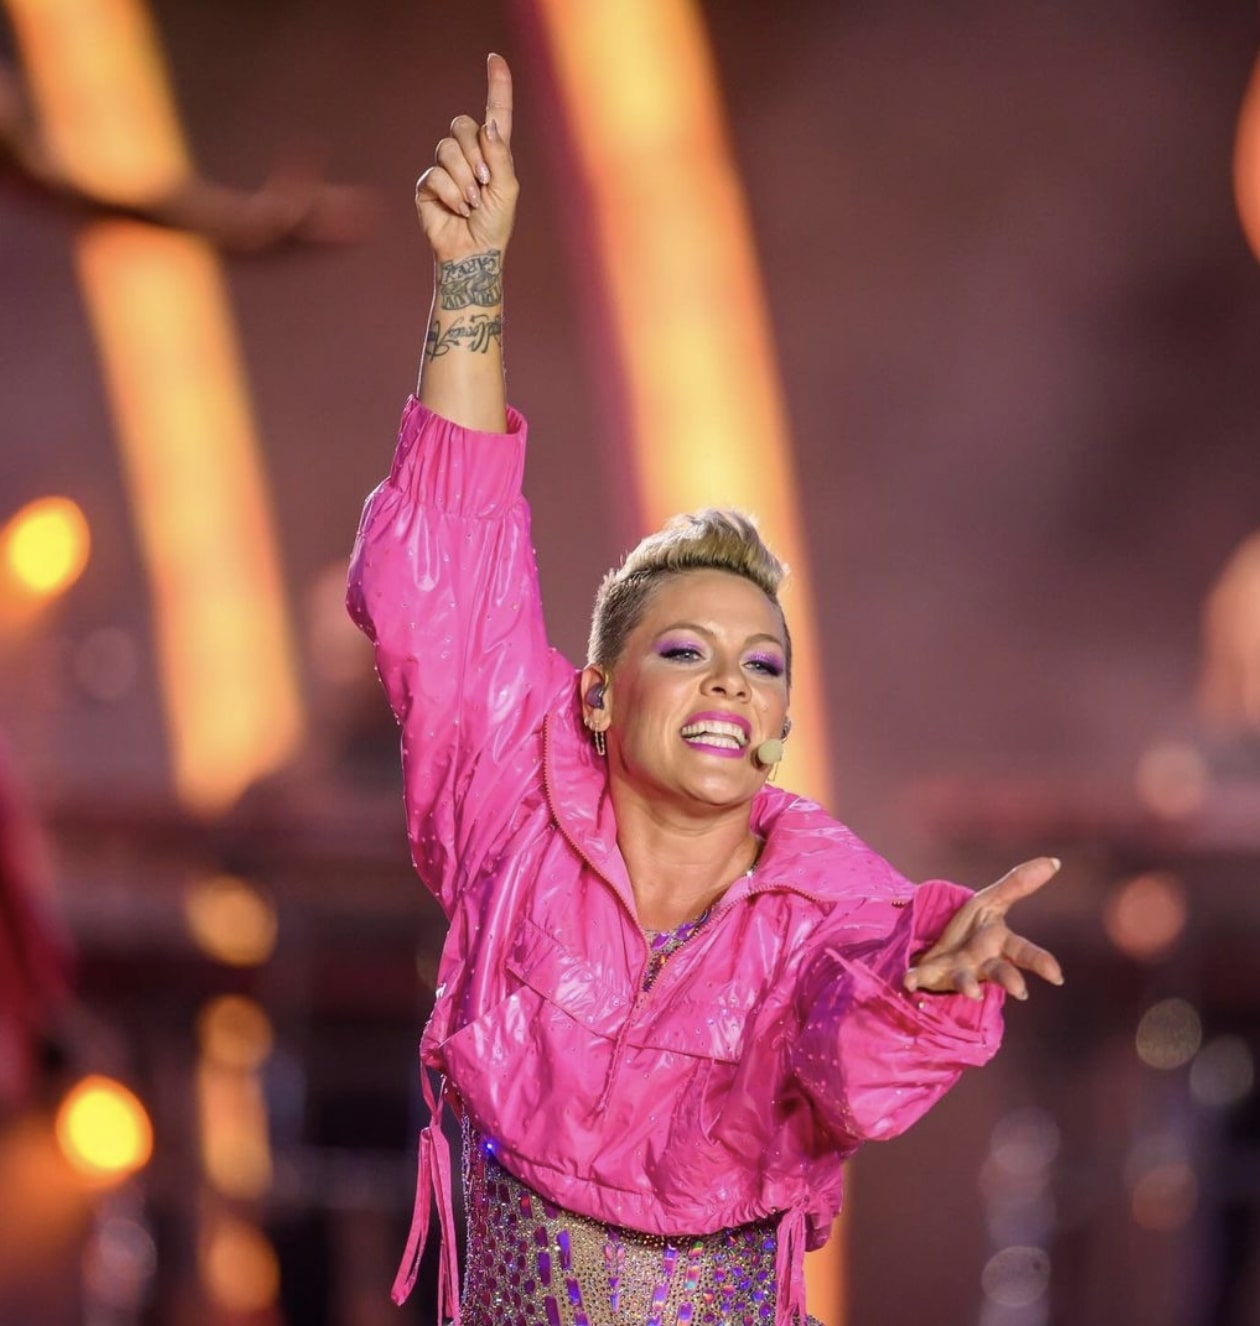 pink,-44-hits-back-at-internet-hater-who-called-her-‘old’